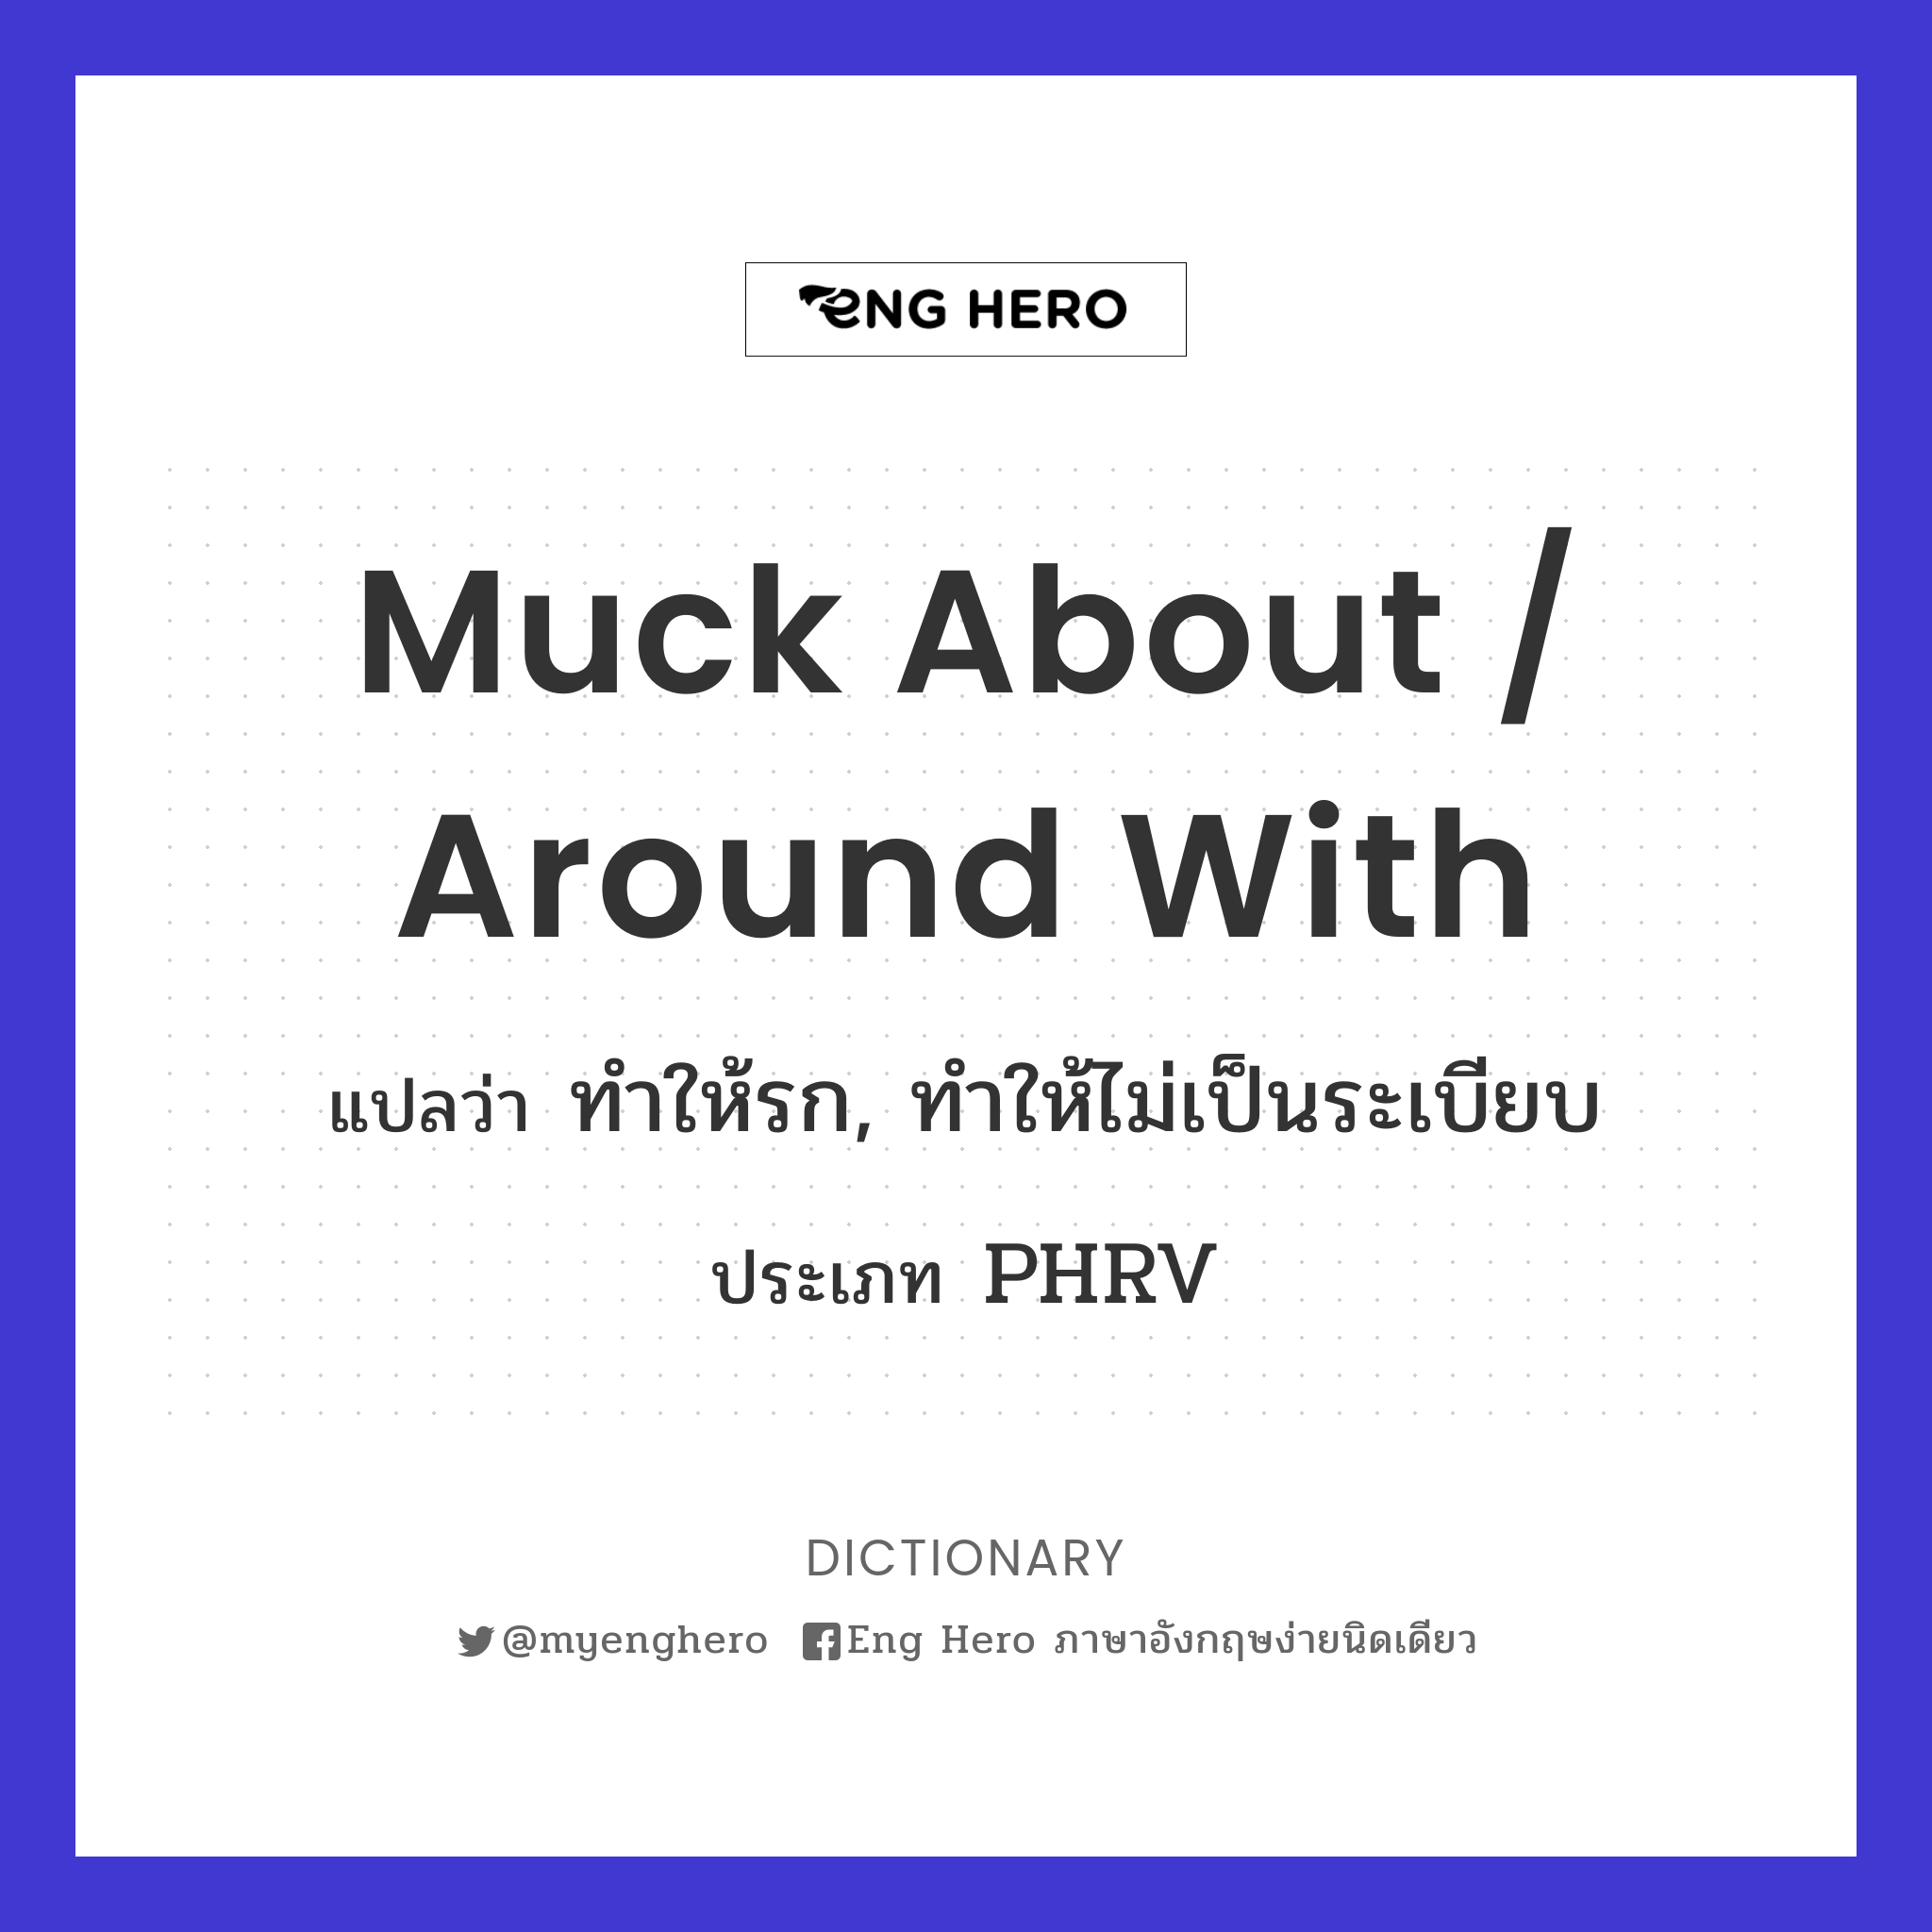 muck about / around with